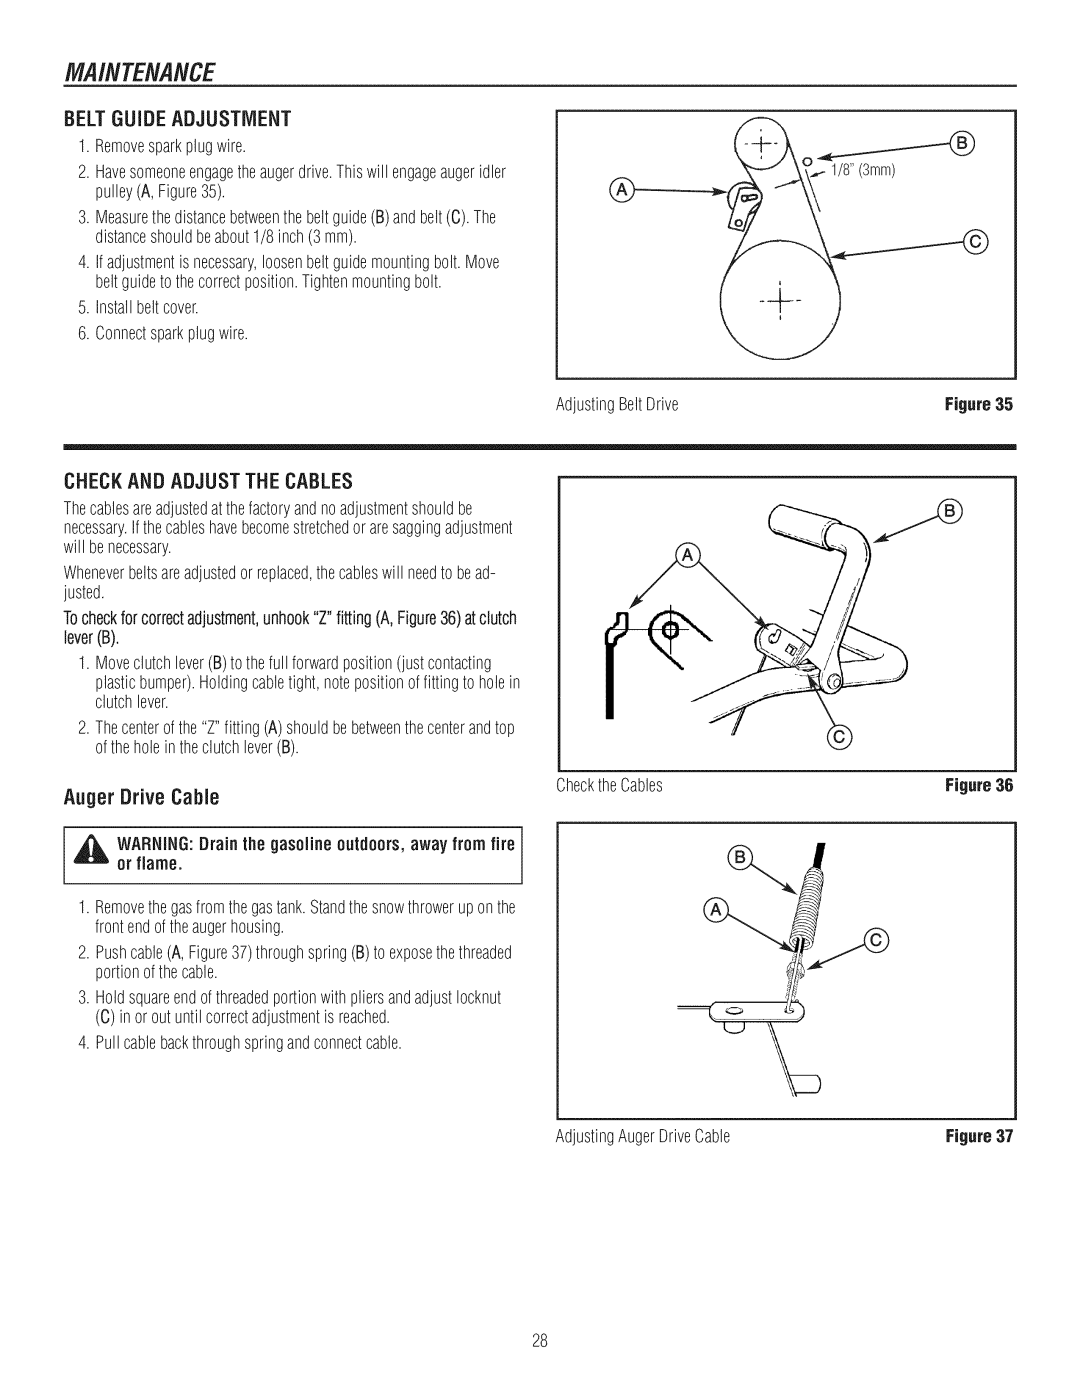 Craftsman C950-52943-0 owner manual Maintenance, Checkandadjustthecables, Auger Drive Cable 